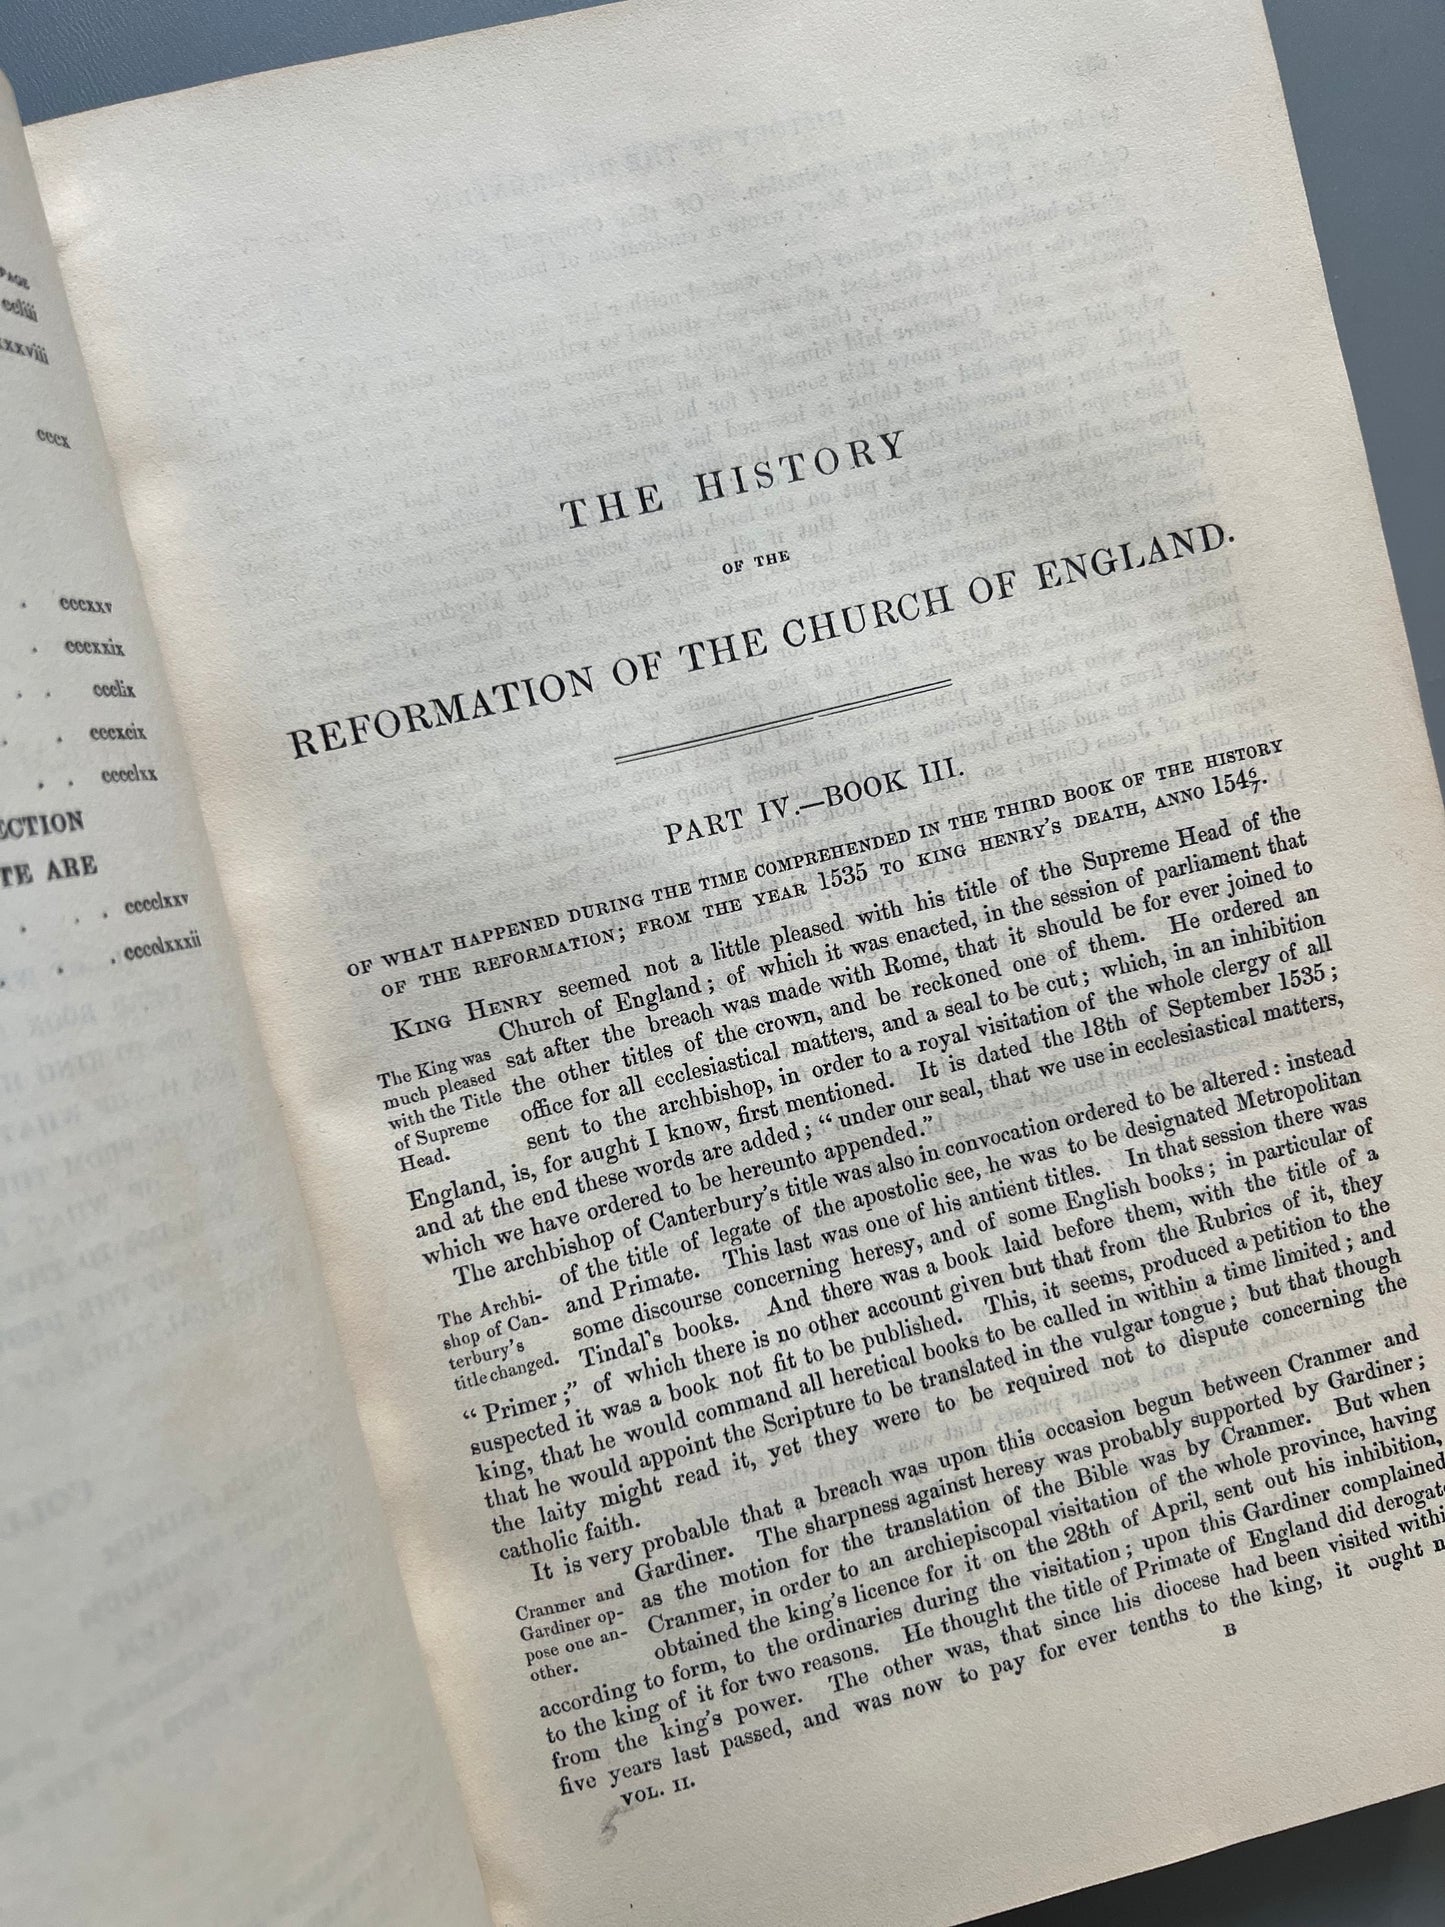 The history of the reformation of the church of England, Gilbert Burnet - William S. Obr & Co Amen corner, 1850